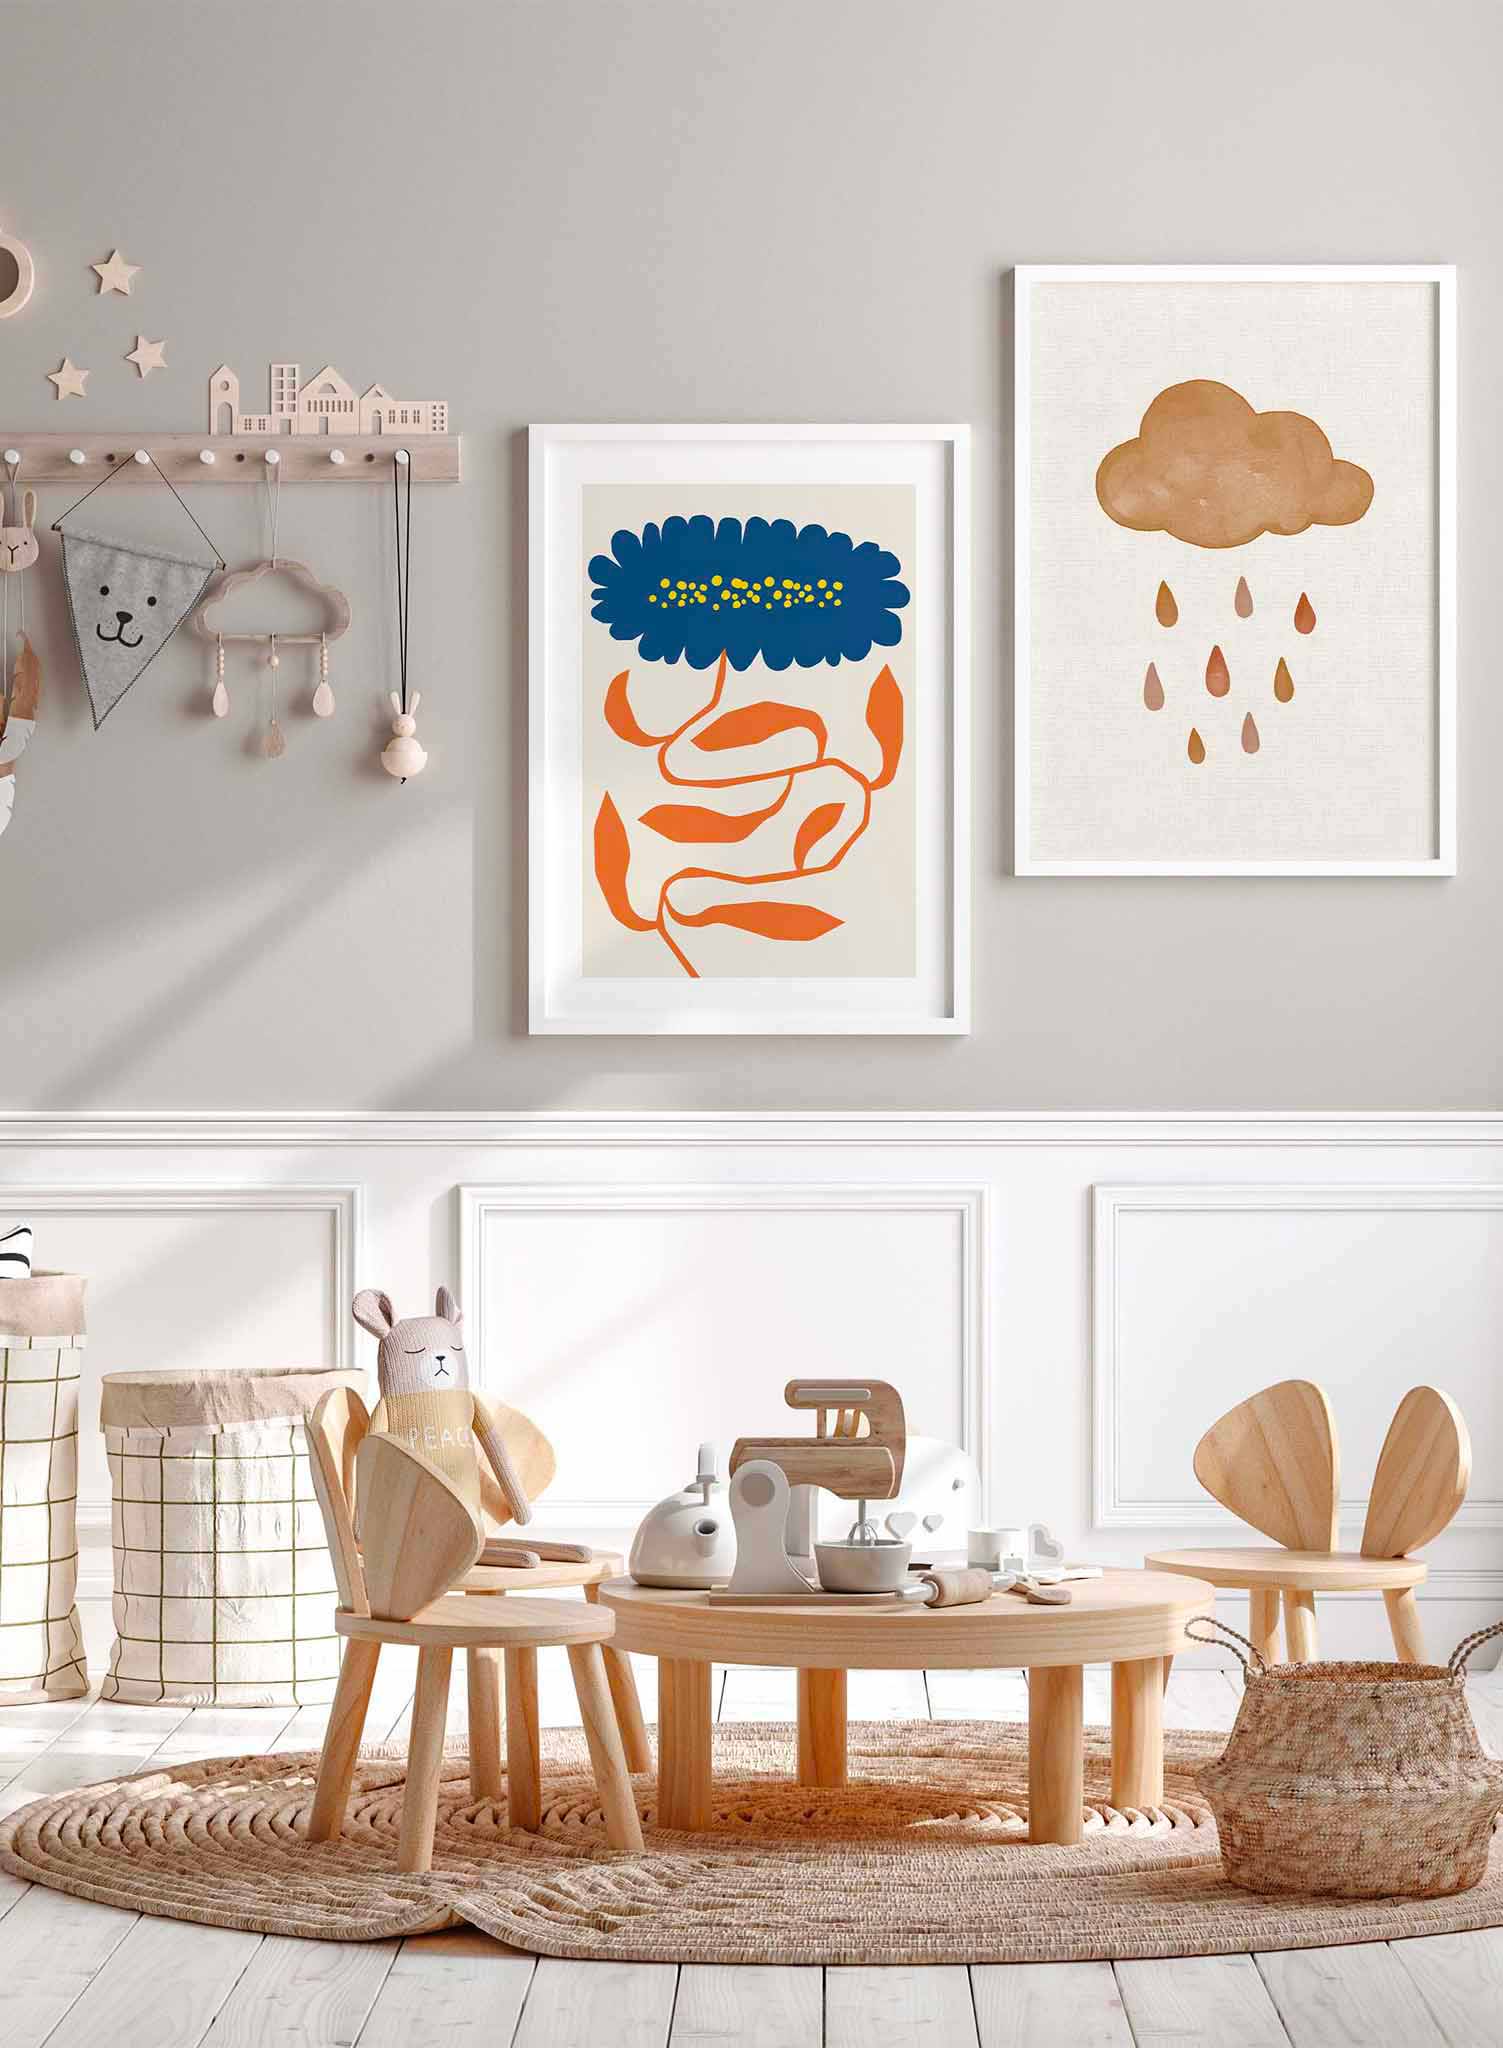 Regal Blossom is a vector illustration of orange leaves building up to an imposing and bold blue flower by Opposite Wall.